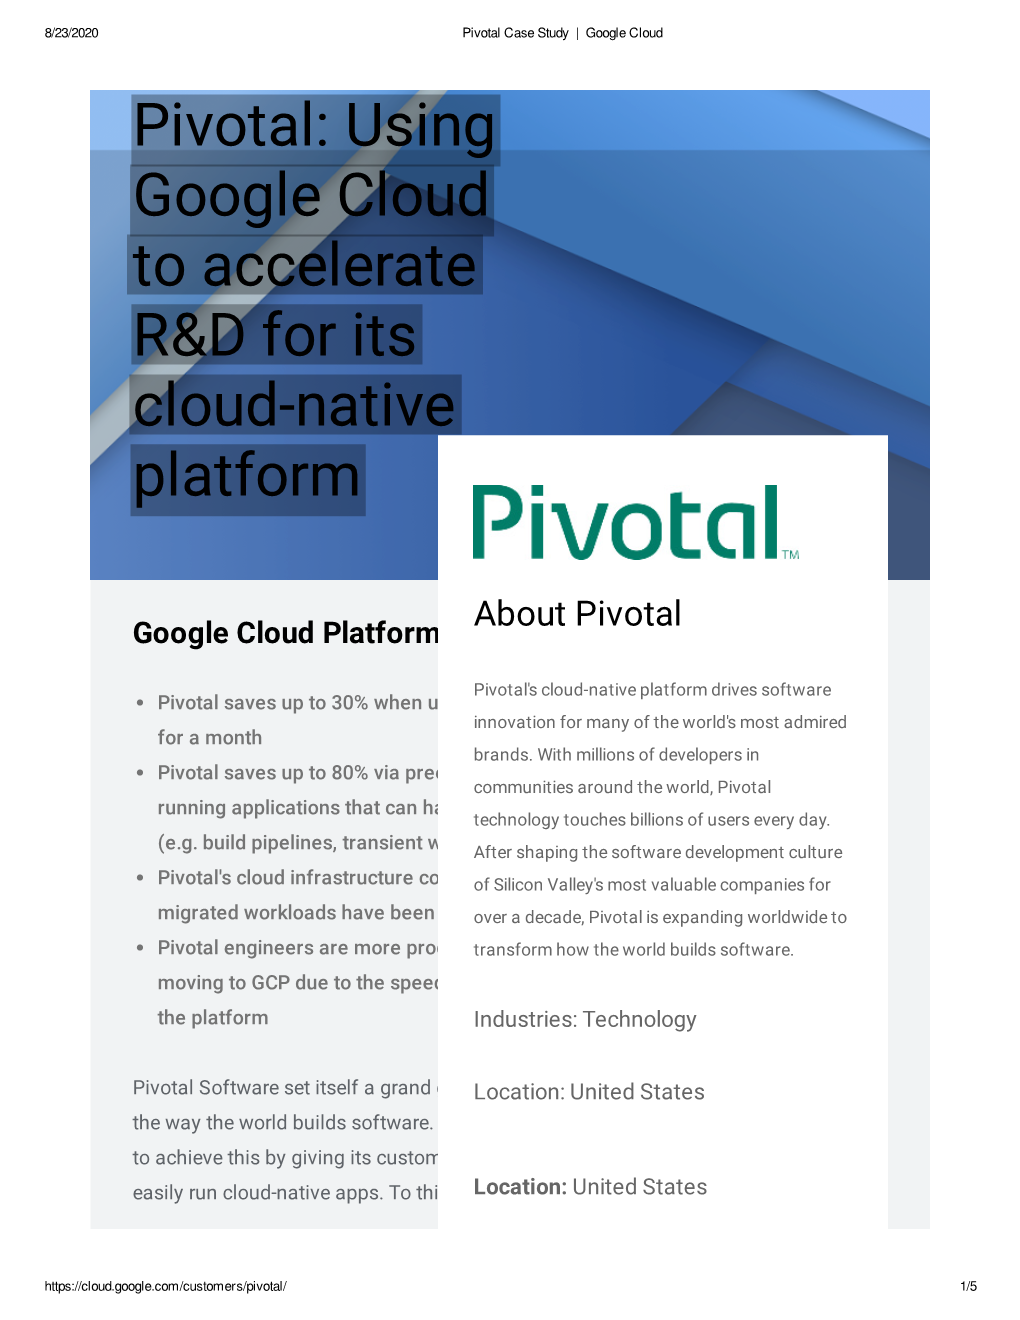 Pivotal: Using Google Cloud to Accelerate R&D for Its Cloud-Native Platform